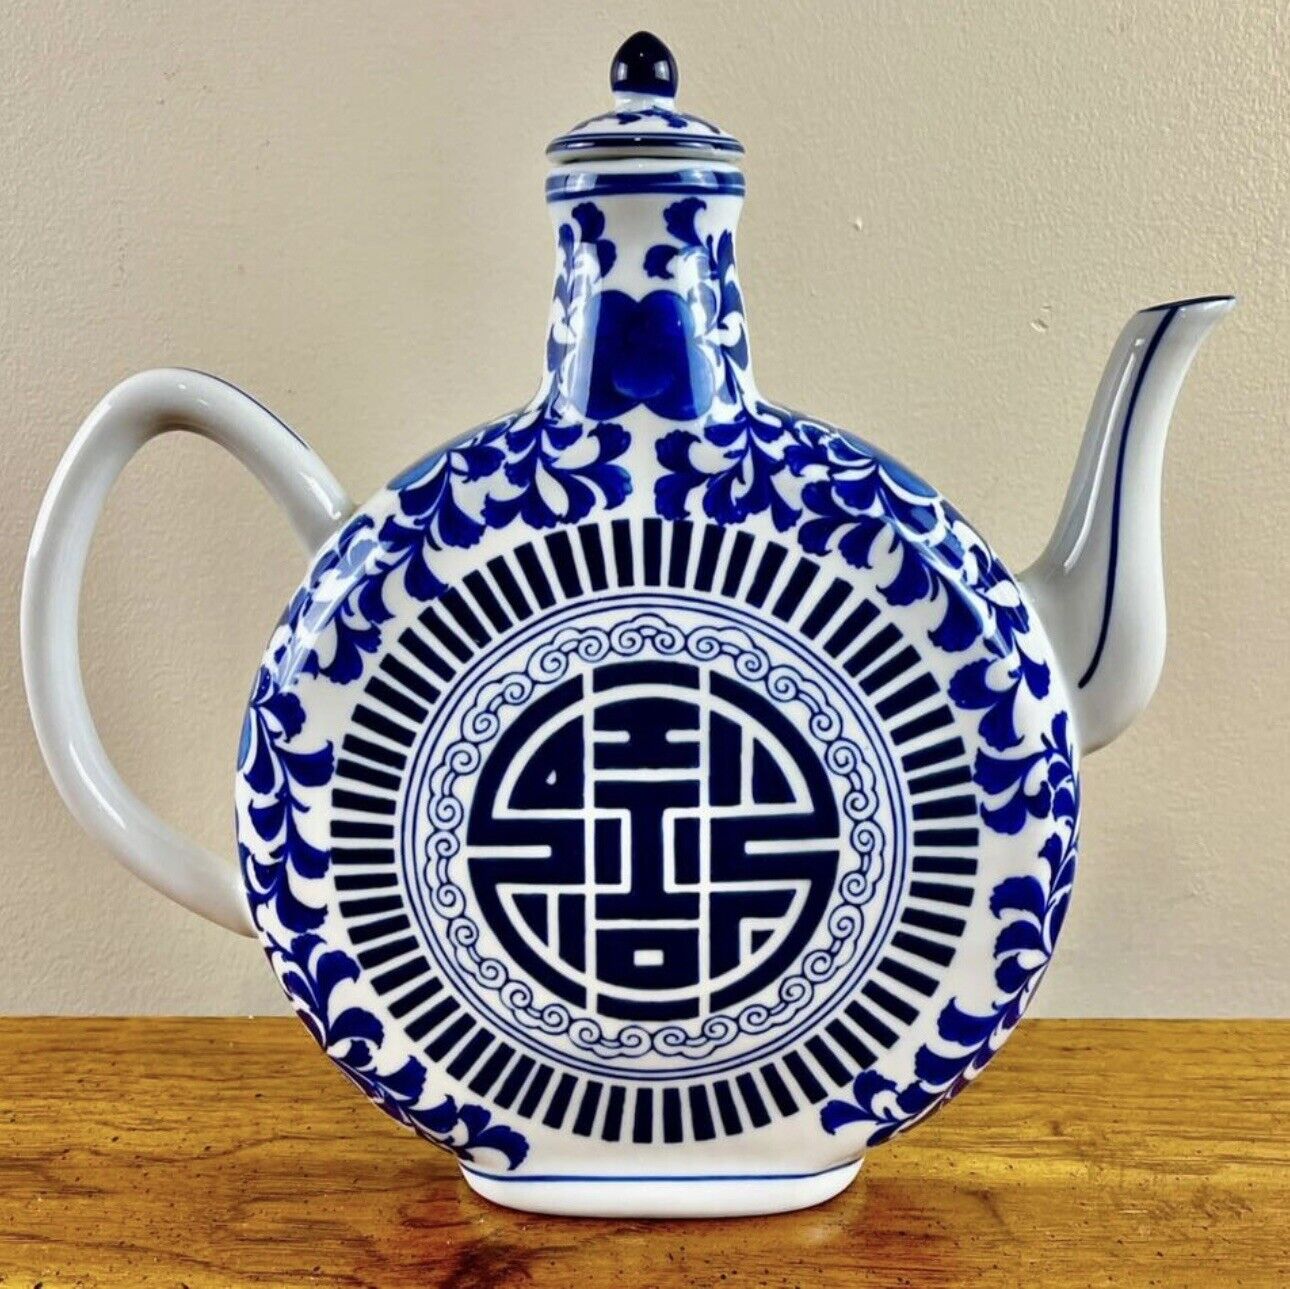 The Bombay Company Blue And White Ewer/Pitcher With Lid And Handle